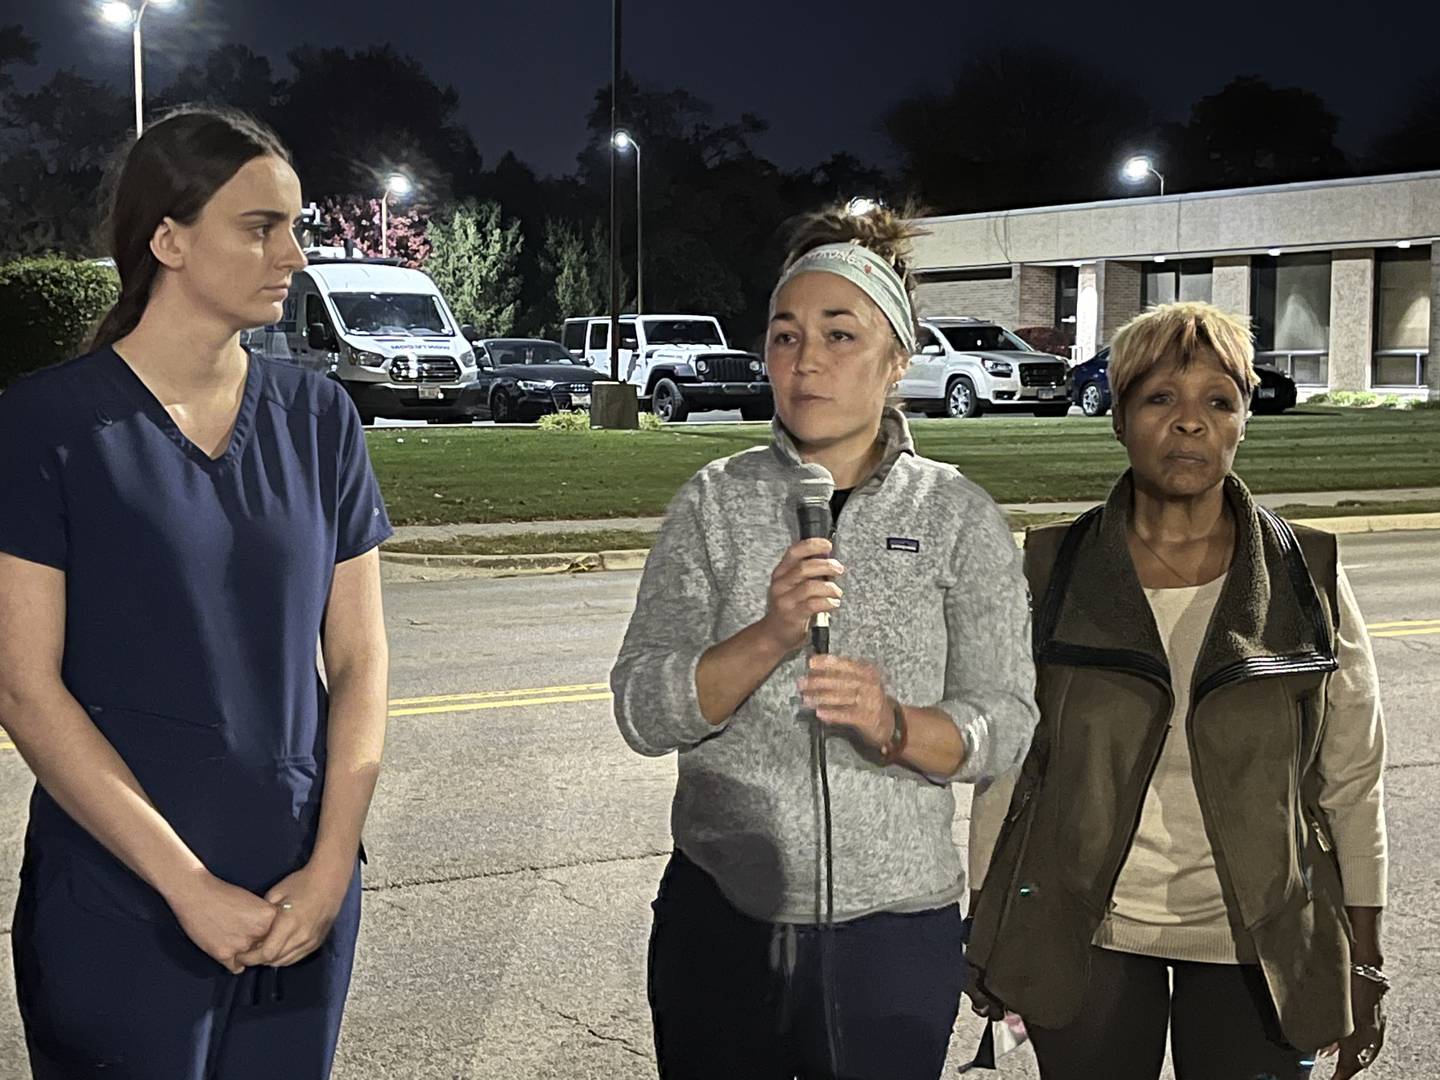 Hannah Puhr (center), an emergency room nurse at Ascension Saint Joseph Medical Center in Joliet, holds a microphone while speaking at a rally on Saturday Oct. 22, 2022. Standing next to Puhr is Katherine Soprych, an Intensive Care Unit nurse (left), and Pat Meade (right), treasurer for the St. Joseph Nurses Association.